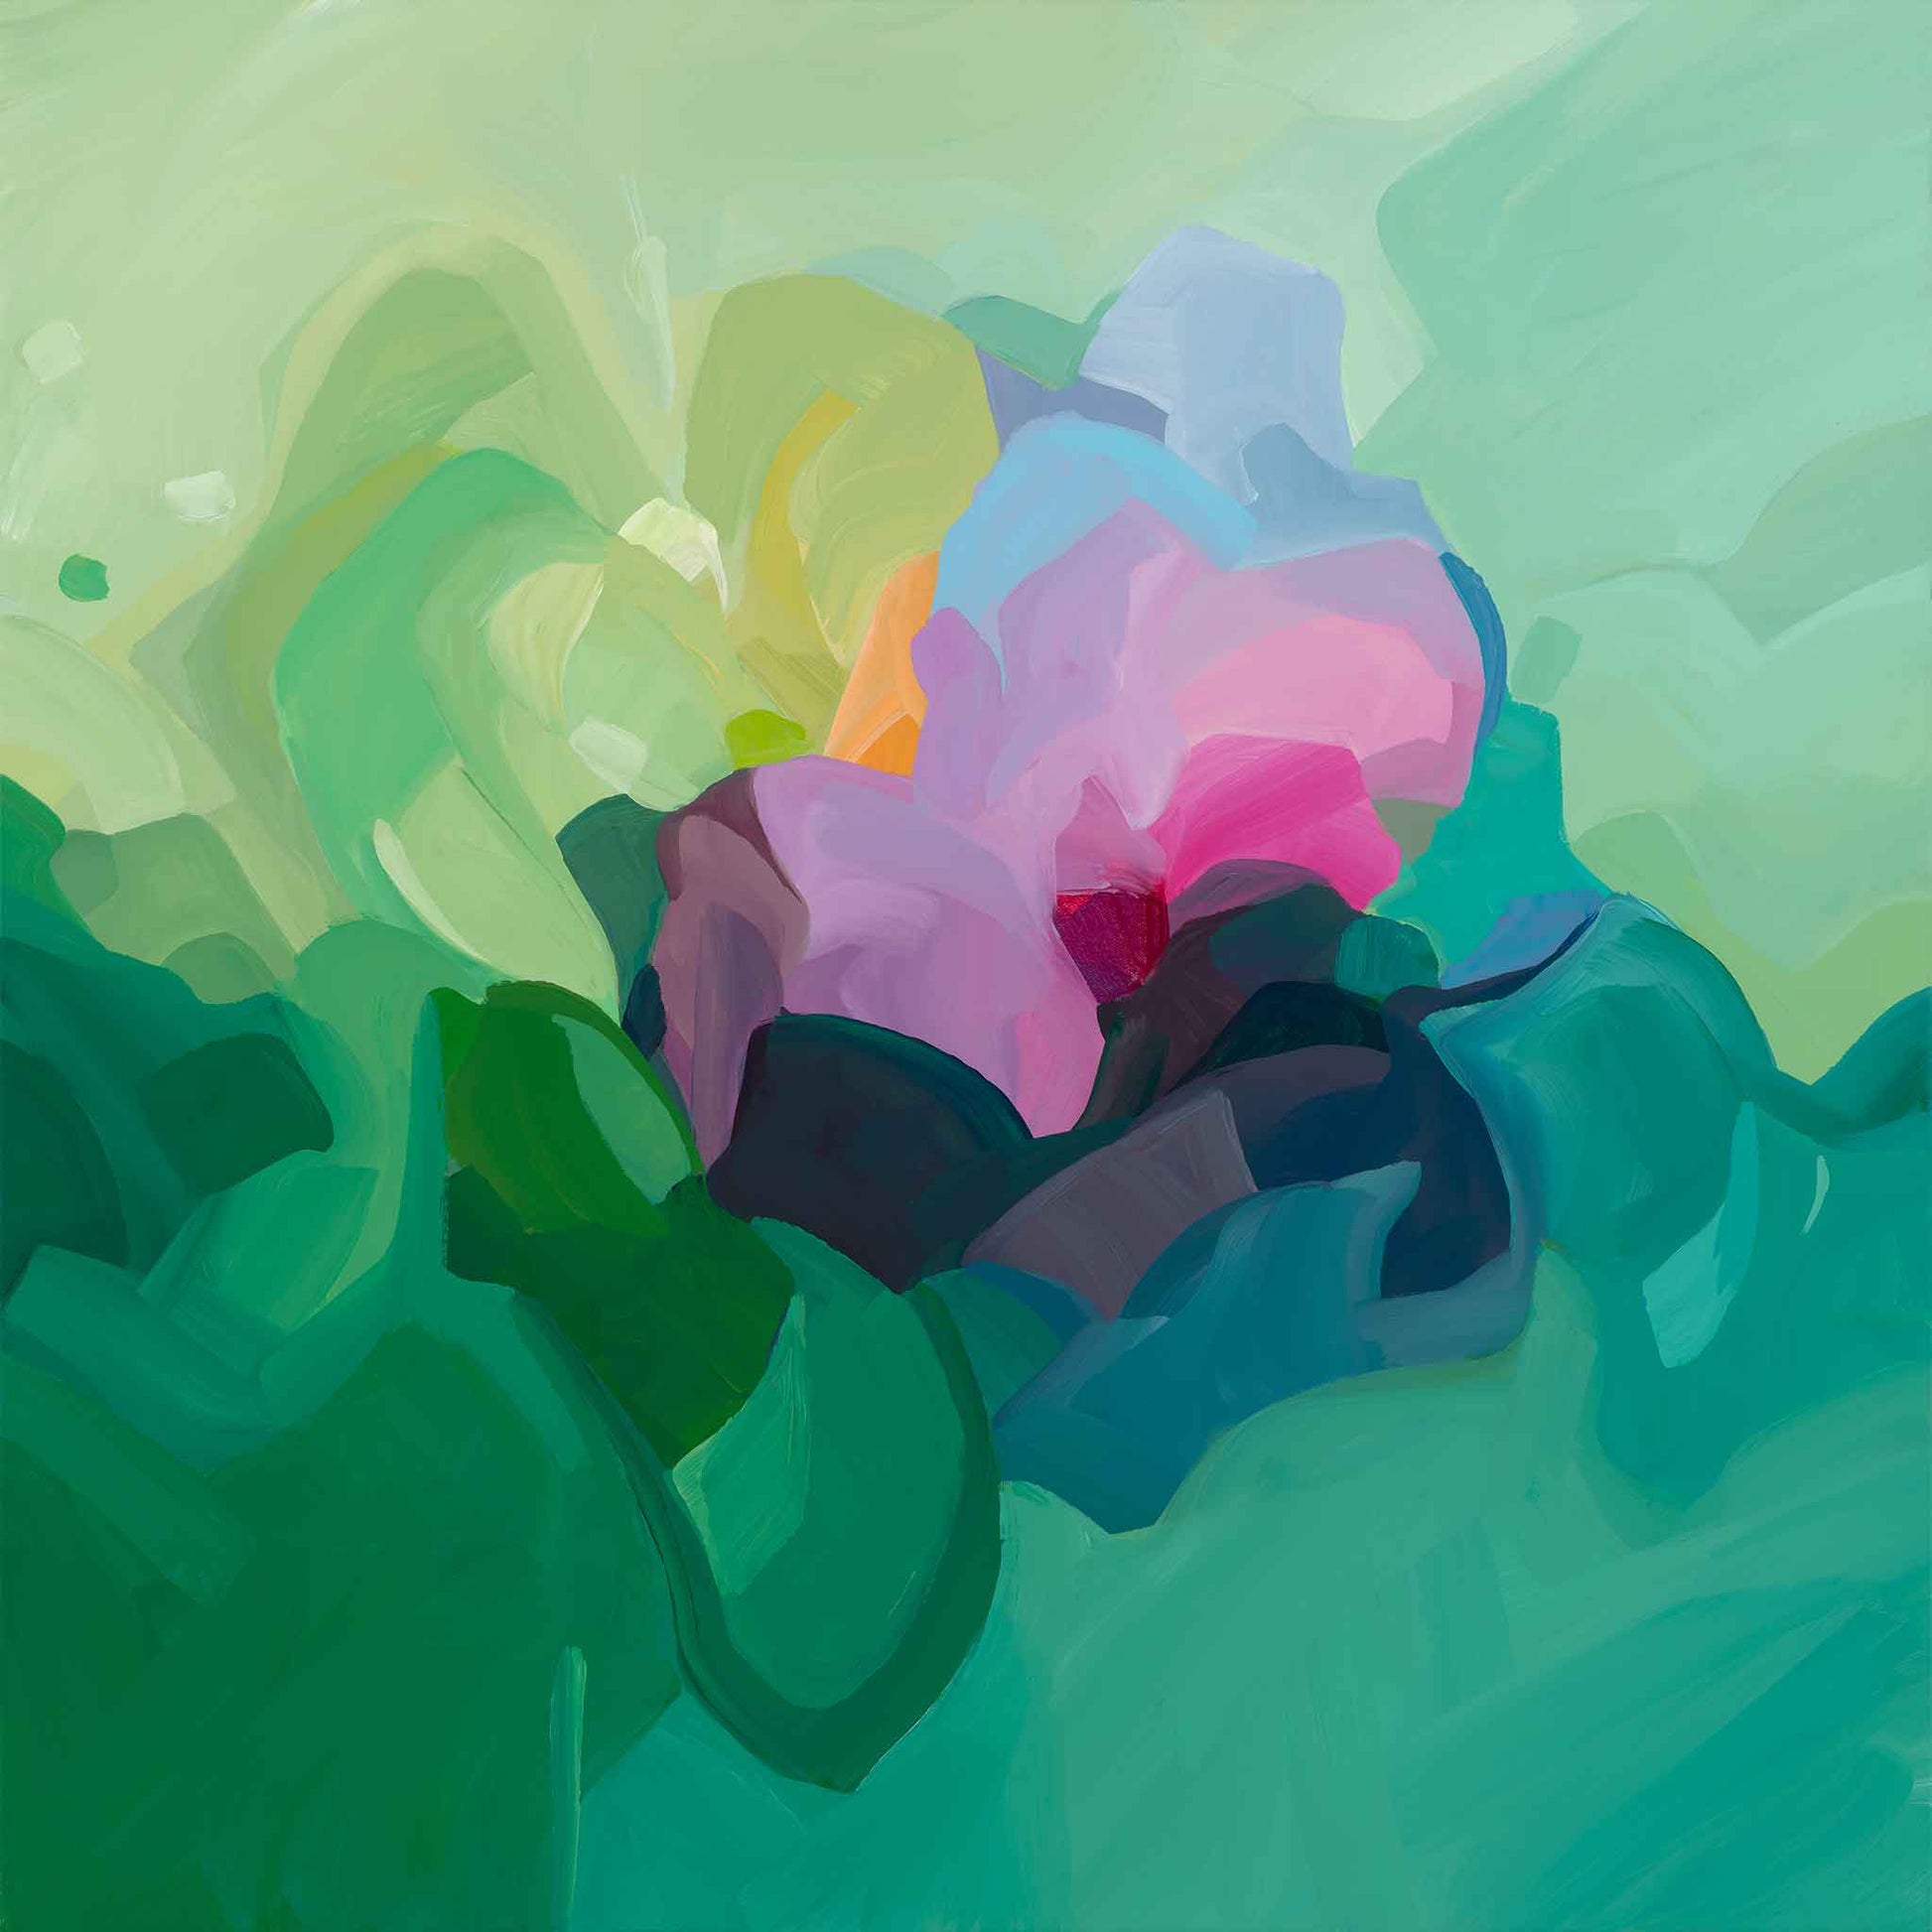 emerald green and jade abstract art print based on an abstract acrylic painting